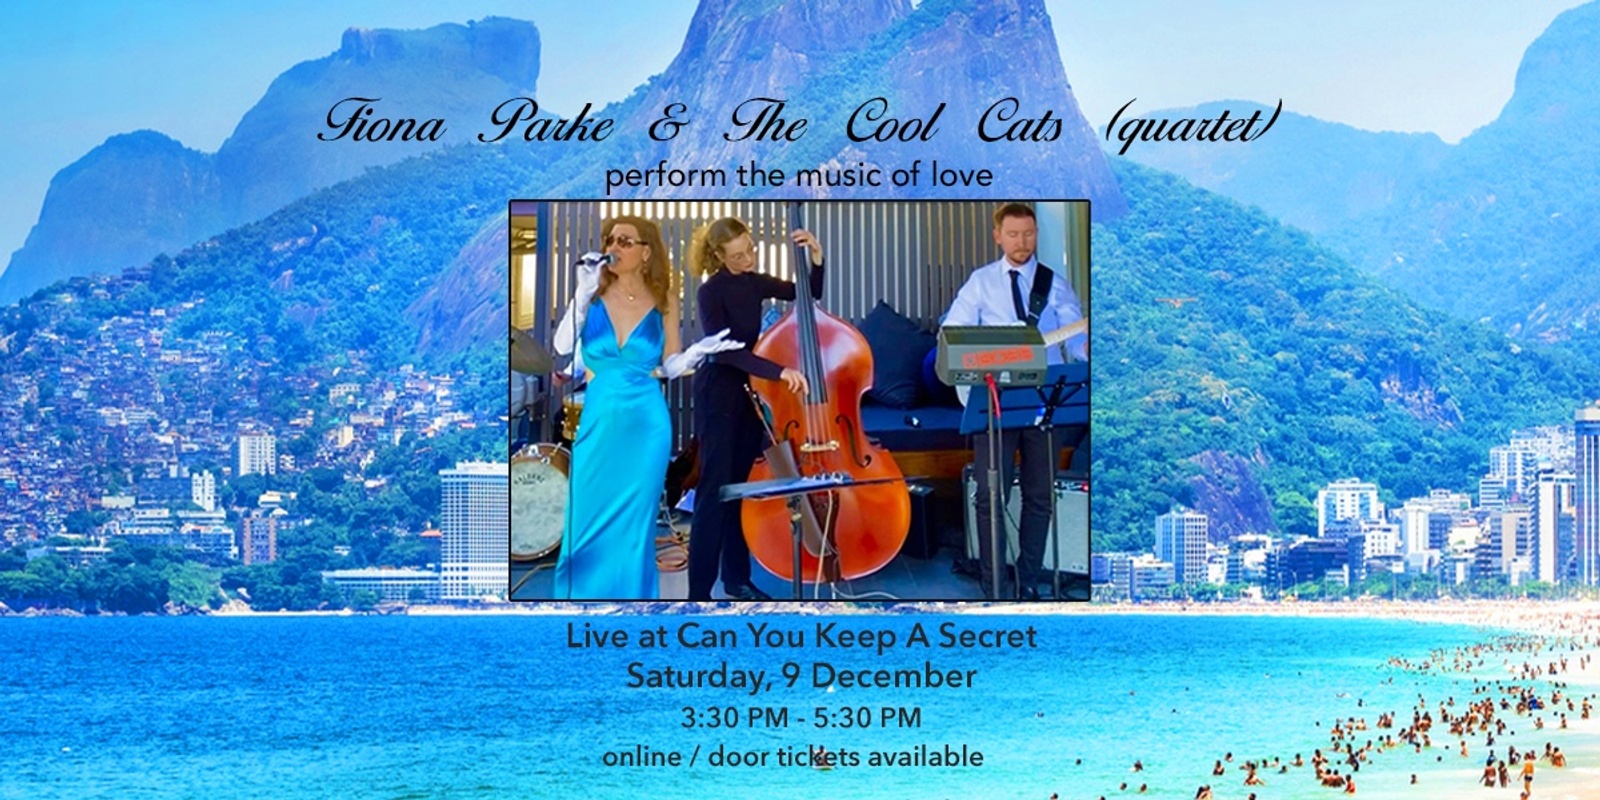 Banner image for Fiona Parke & the Cool Cats perform the music of love